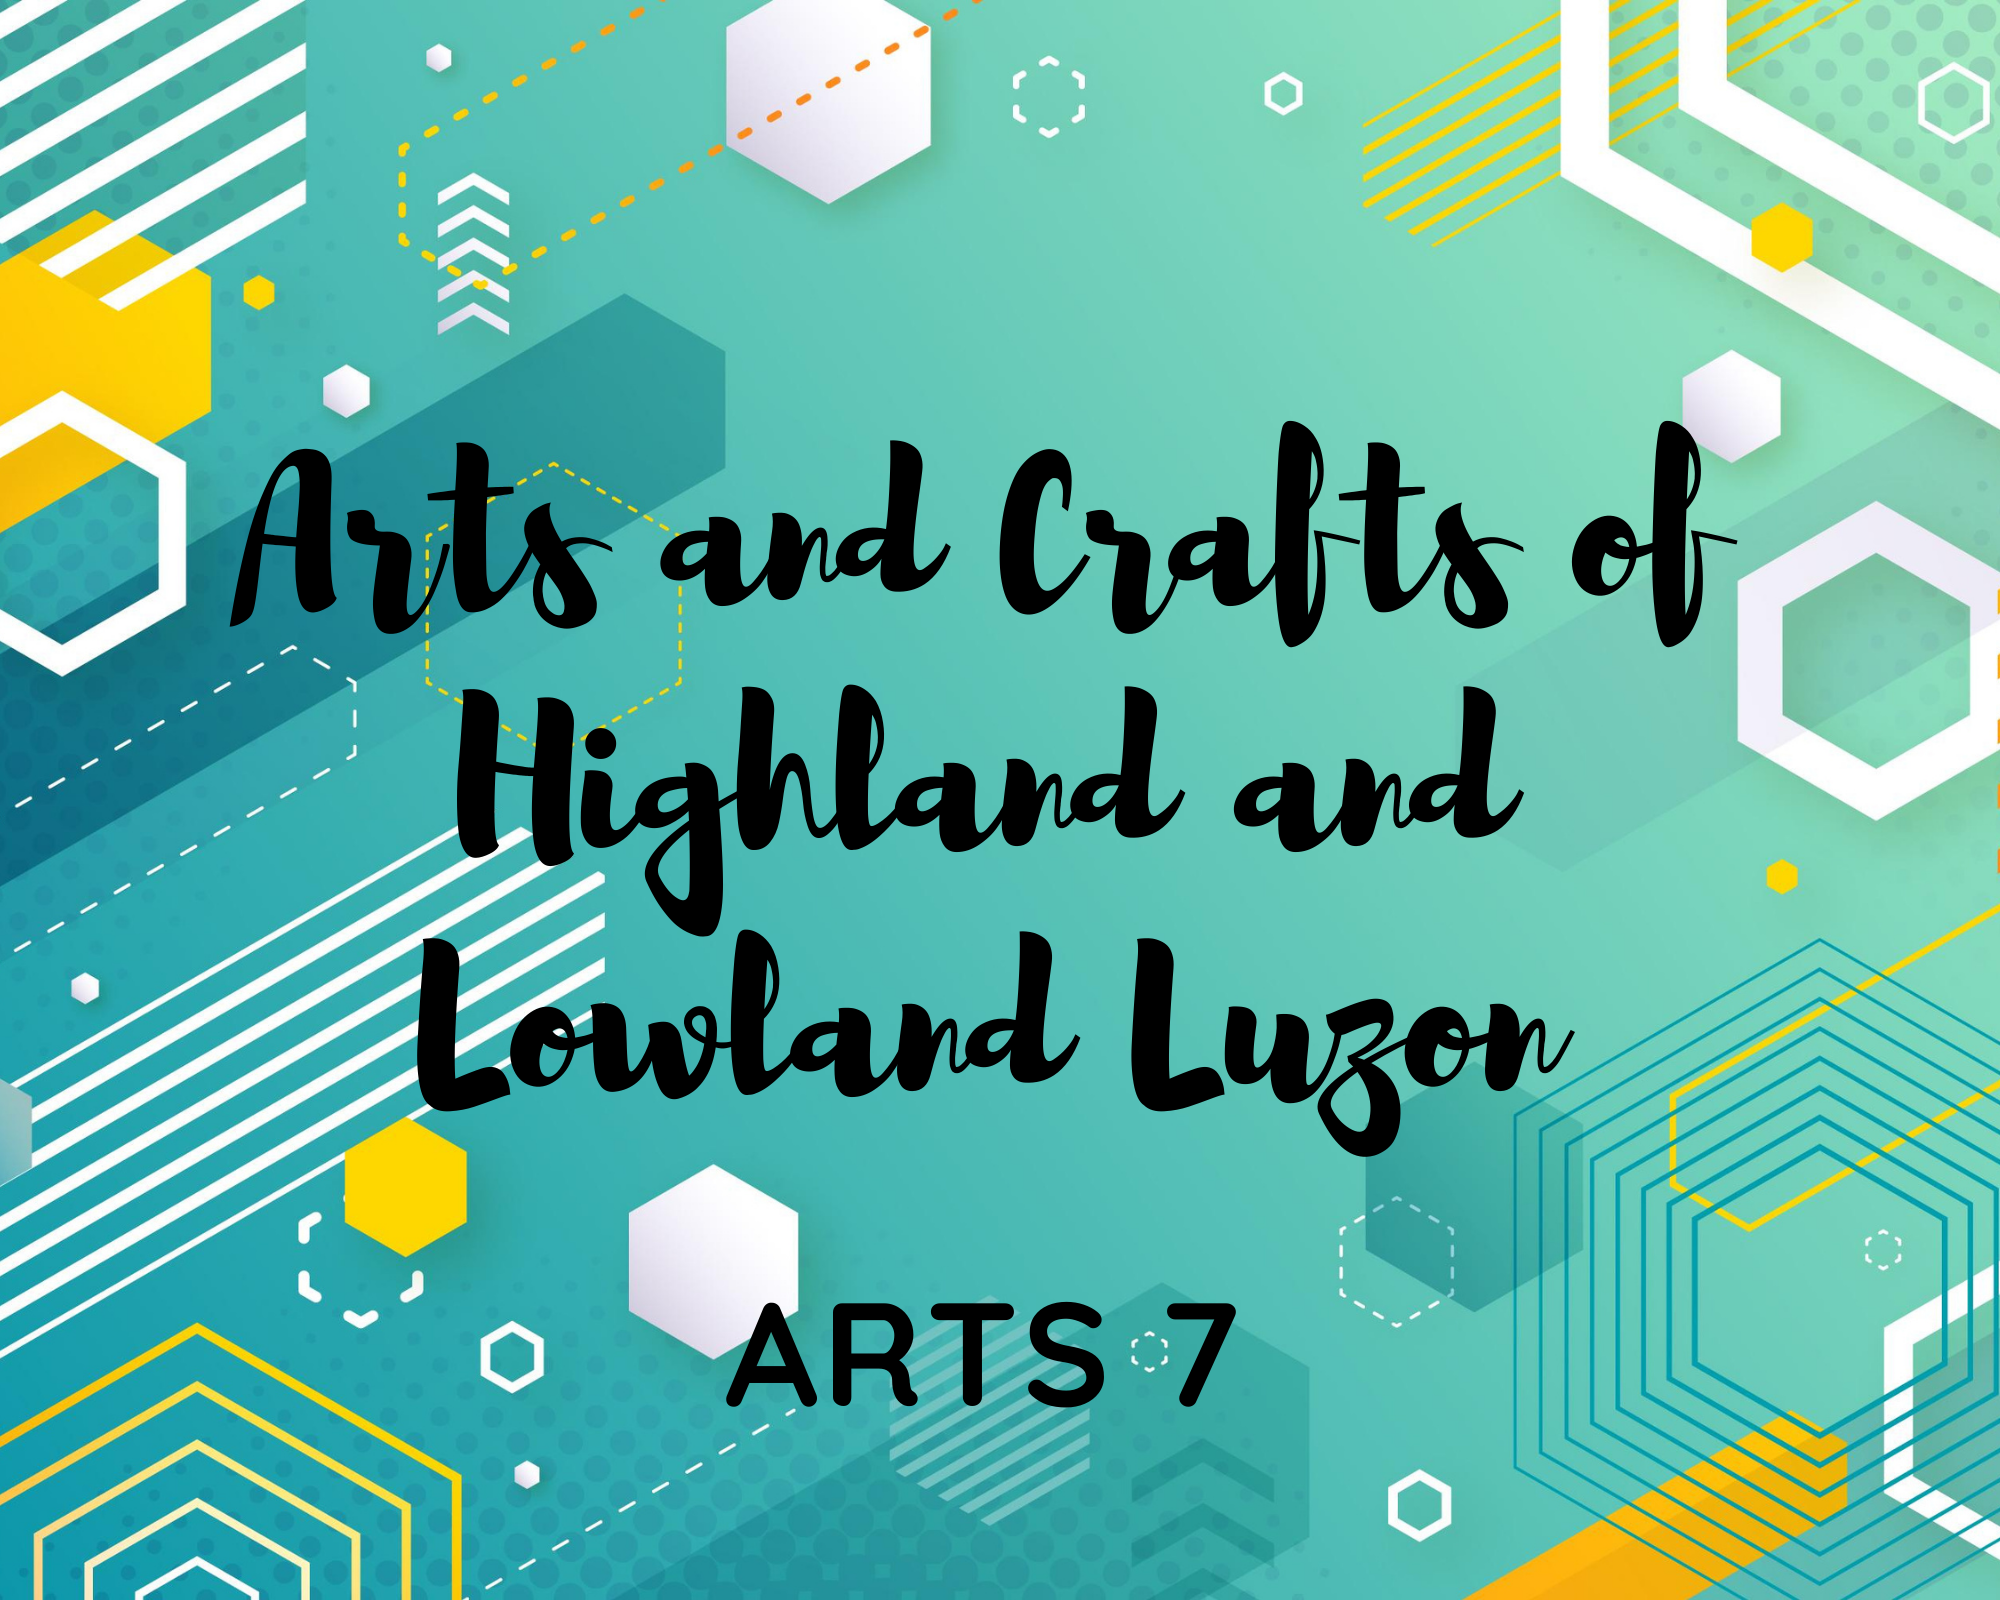 Arts and Crafts of Highland and Lowland Luzon